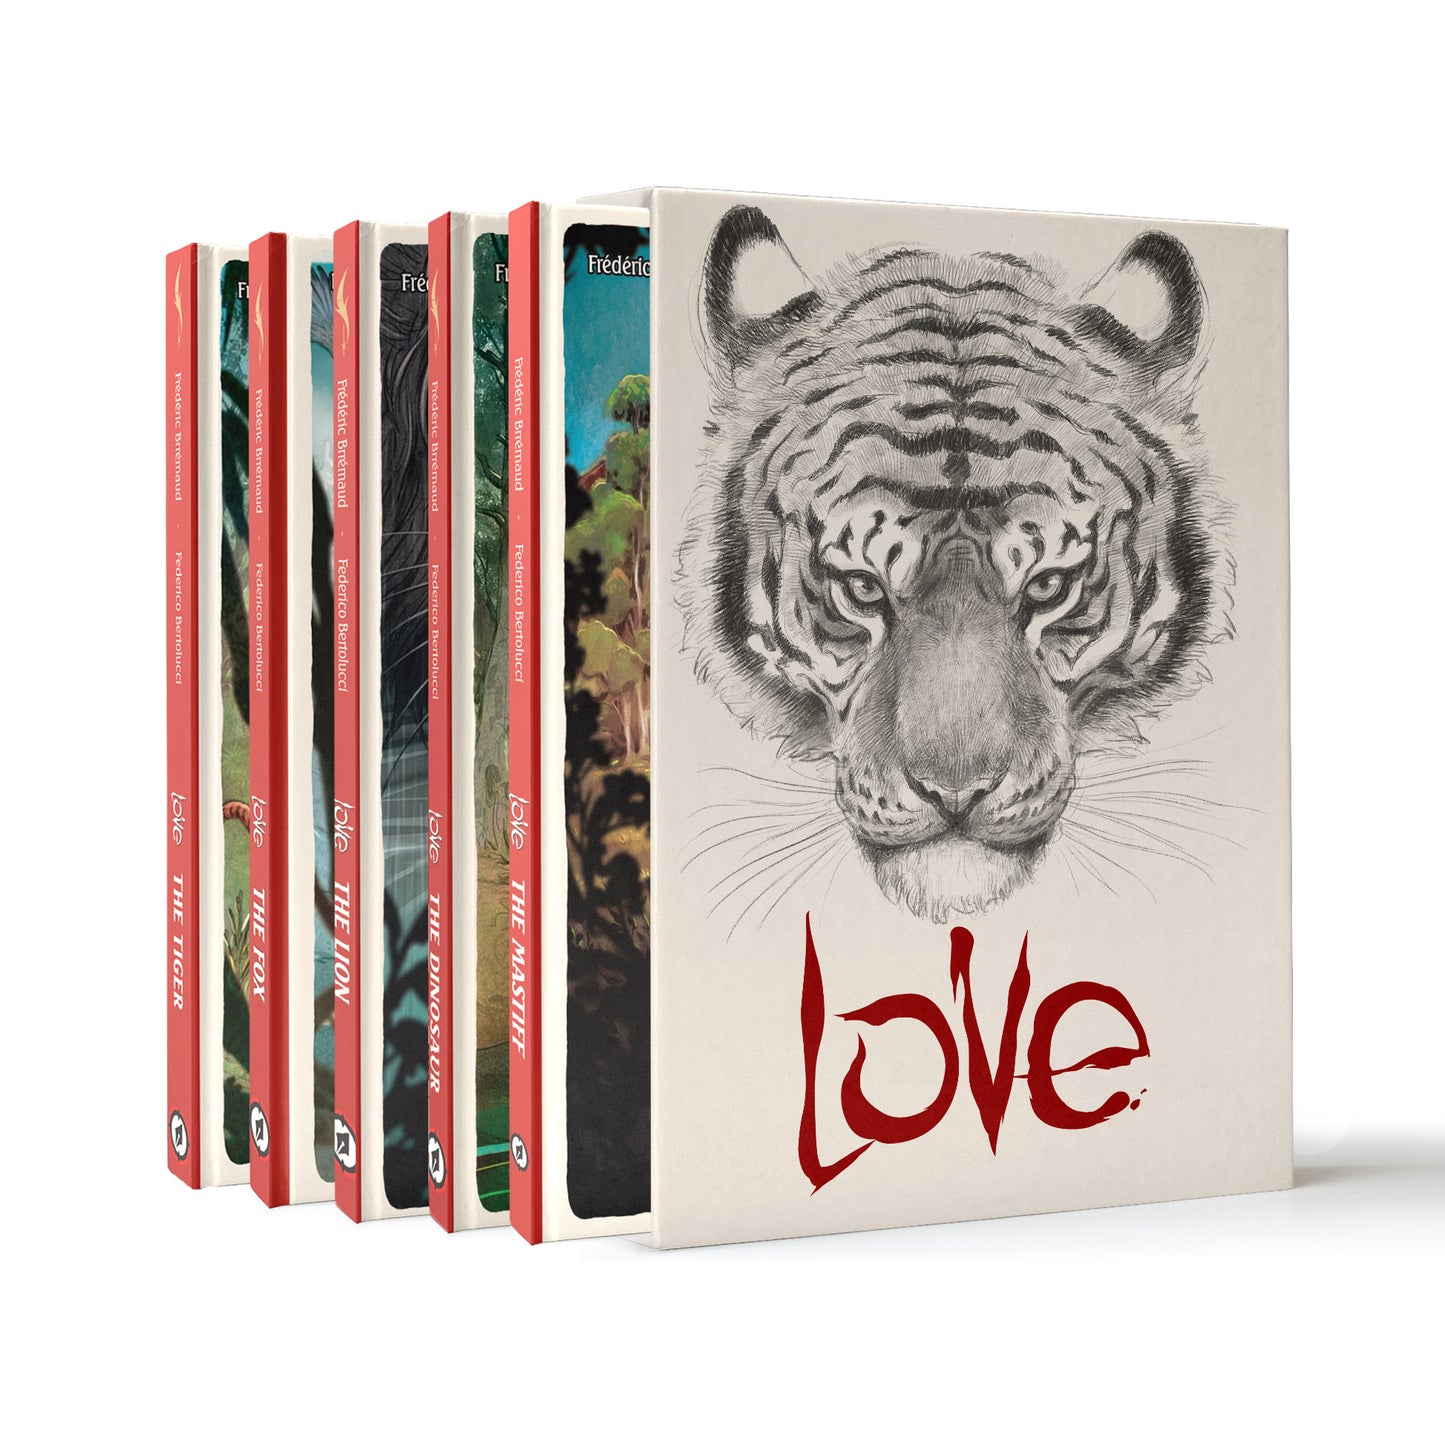 LOVE Series Boxed Set by Brremaud and Bertolucci